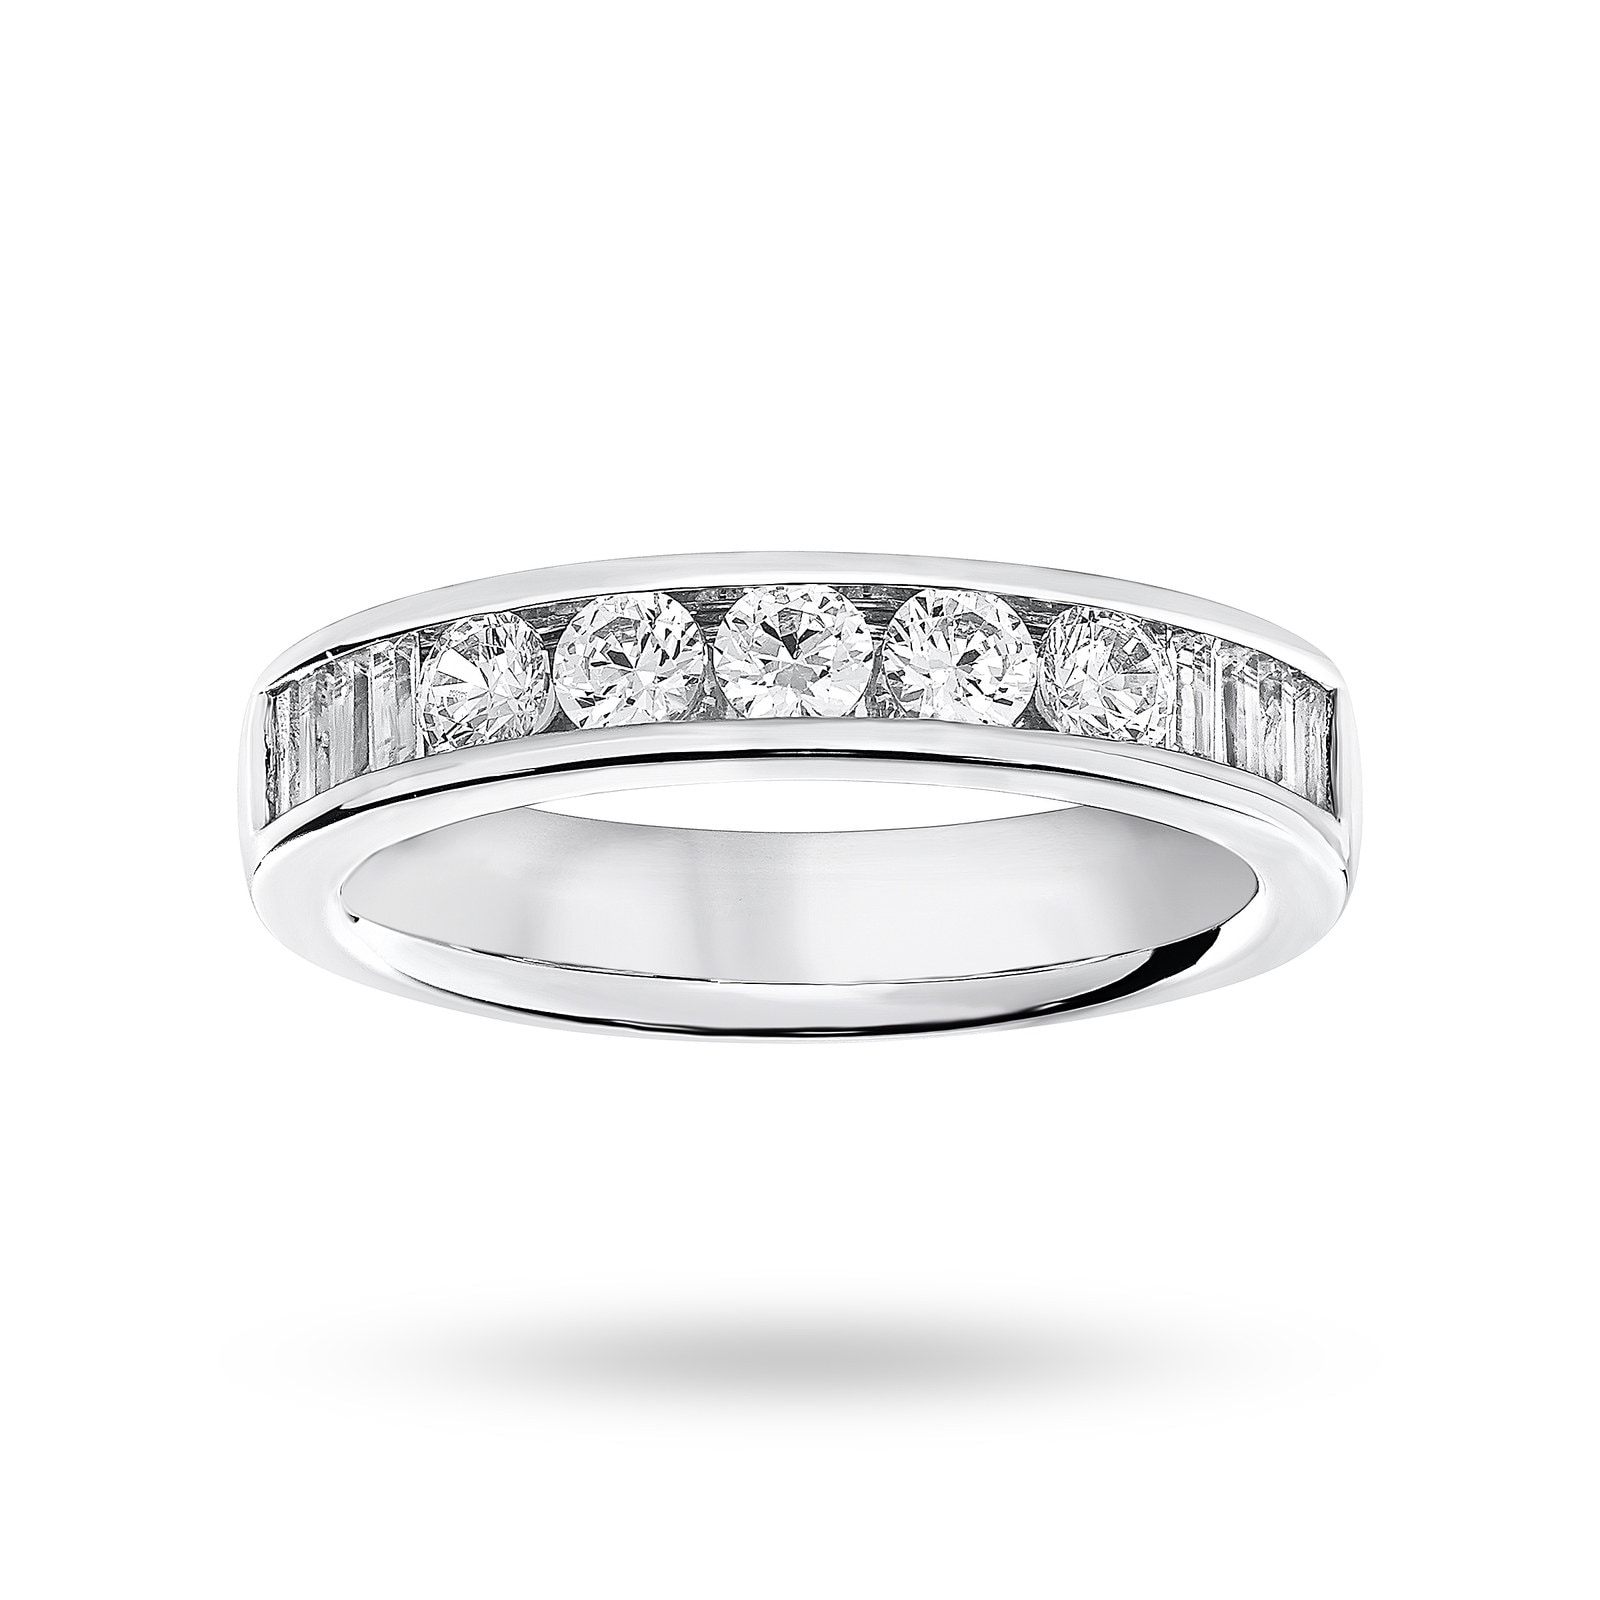 Platinum 075 Carat Brilliant Cut And Baguette Channel Set Half Eternity Ring Ring Size O